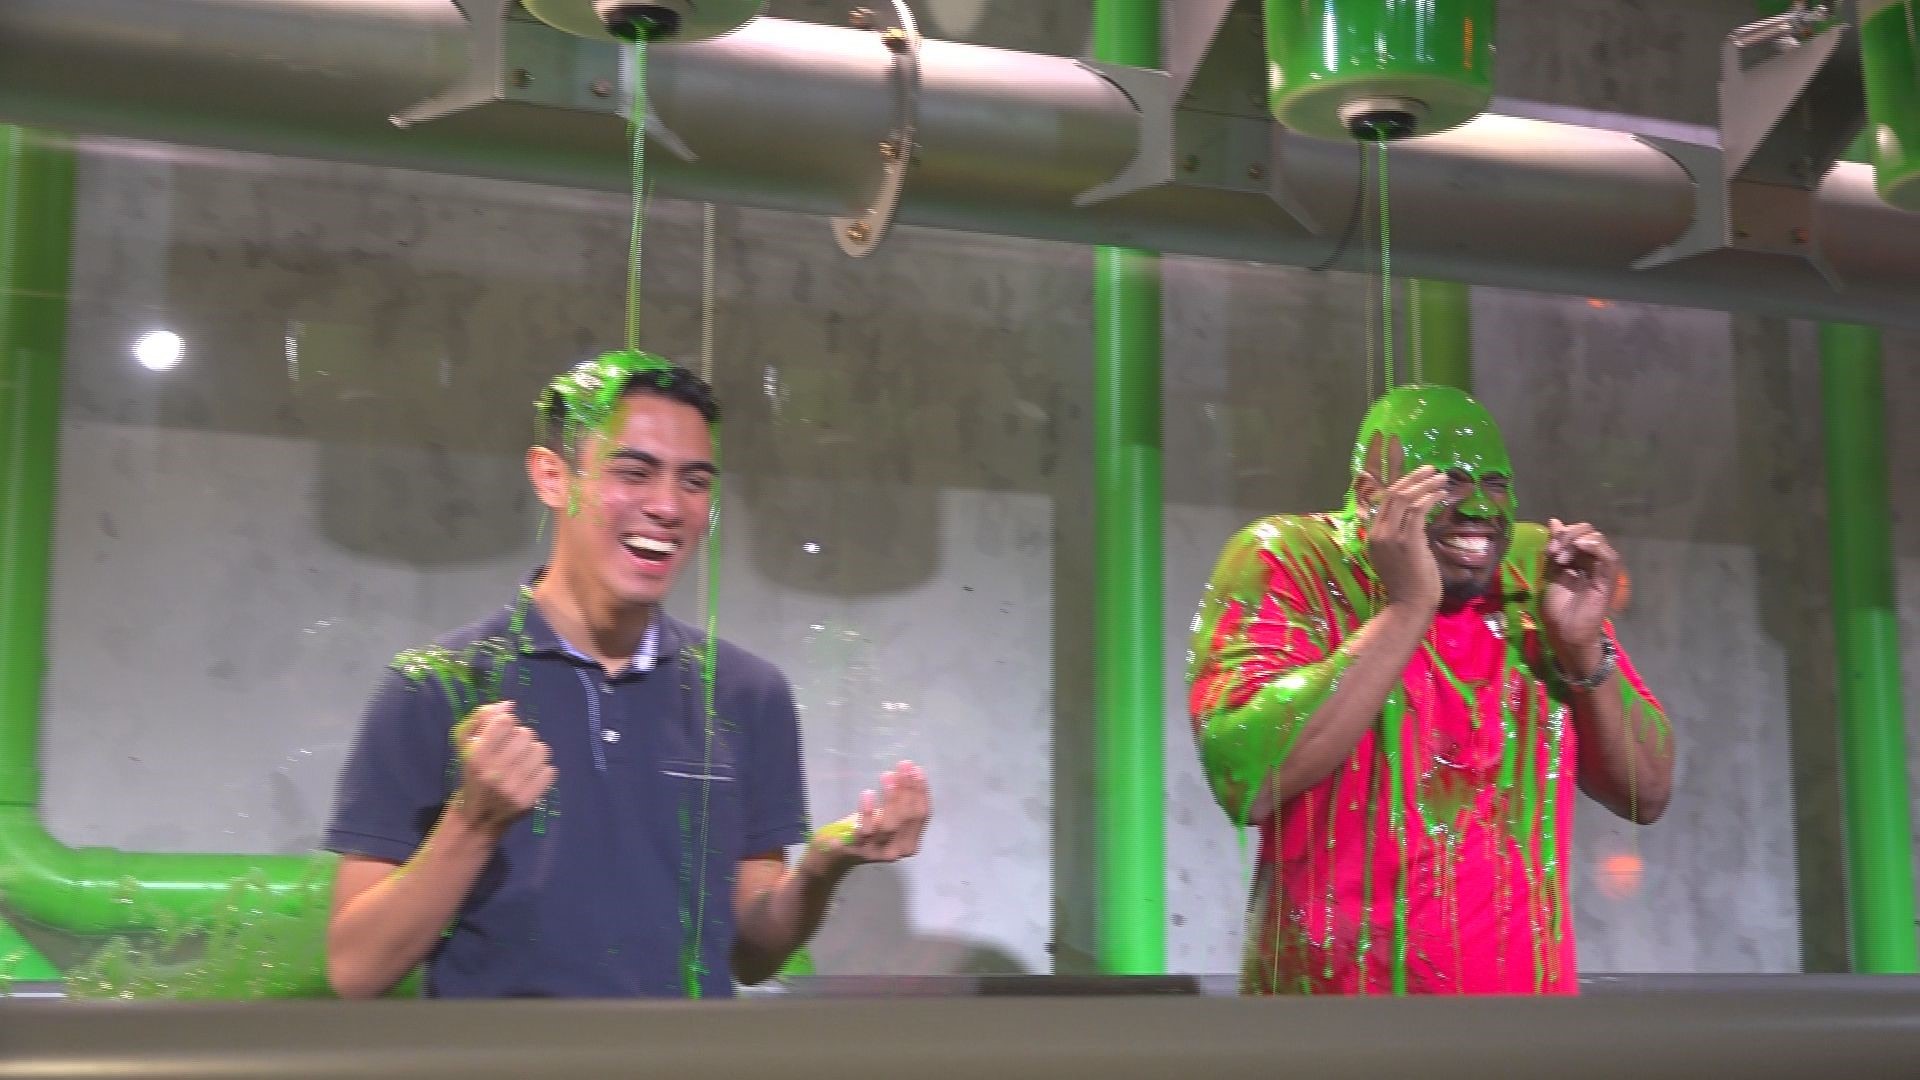 Admit it - you’ve always been hit with just a hint of curiosity of what it would be like to be slimed by that ooey, gooey, green slime made famous by Nickelodeon. The A-Scene's Ryan Dennis has the scoop!